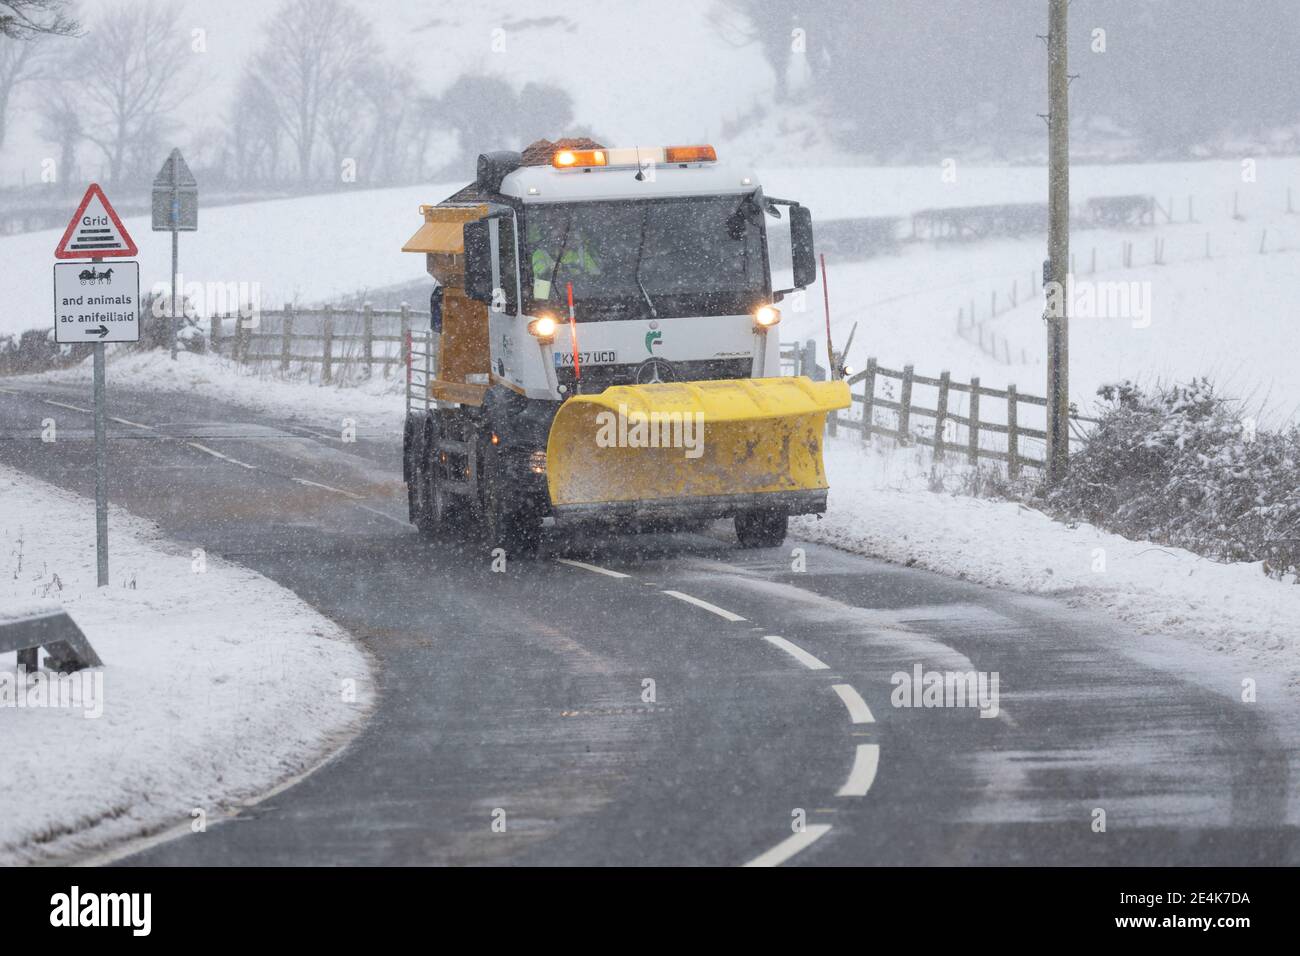 Flintshire, North Wales, UK Wednesday 24th January 2021, UK Weather:  Heavy snowfall in North Wales with a Met Office weather warning in place snow as a weather front tracks eastward across the country. Flintshire gritting vehicles begin a days of grititng in the area near Brynford with snow expected for most of the day in the area  © DGDImages/Alamy Live News Stock Photo